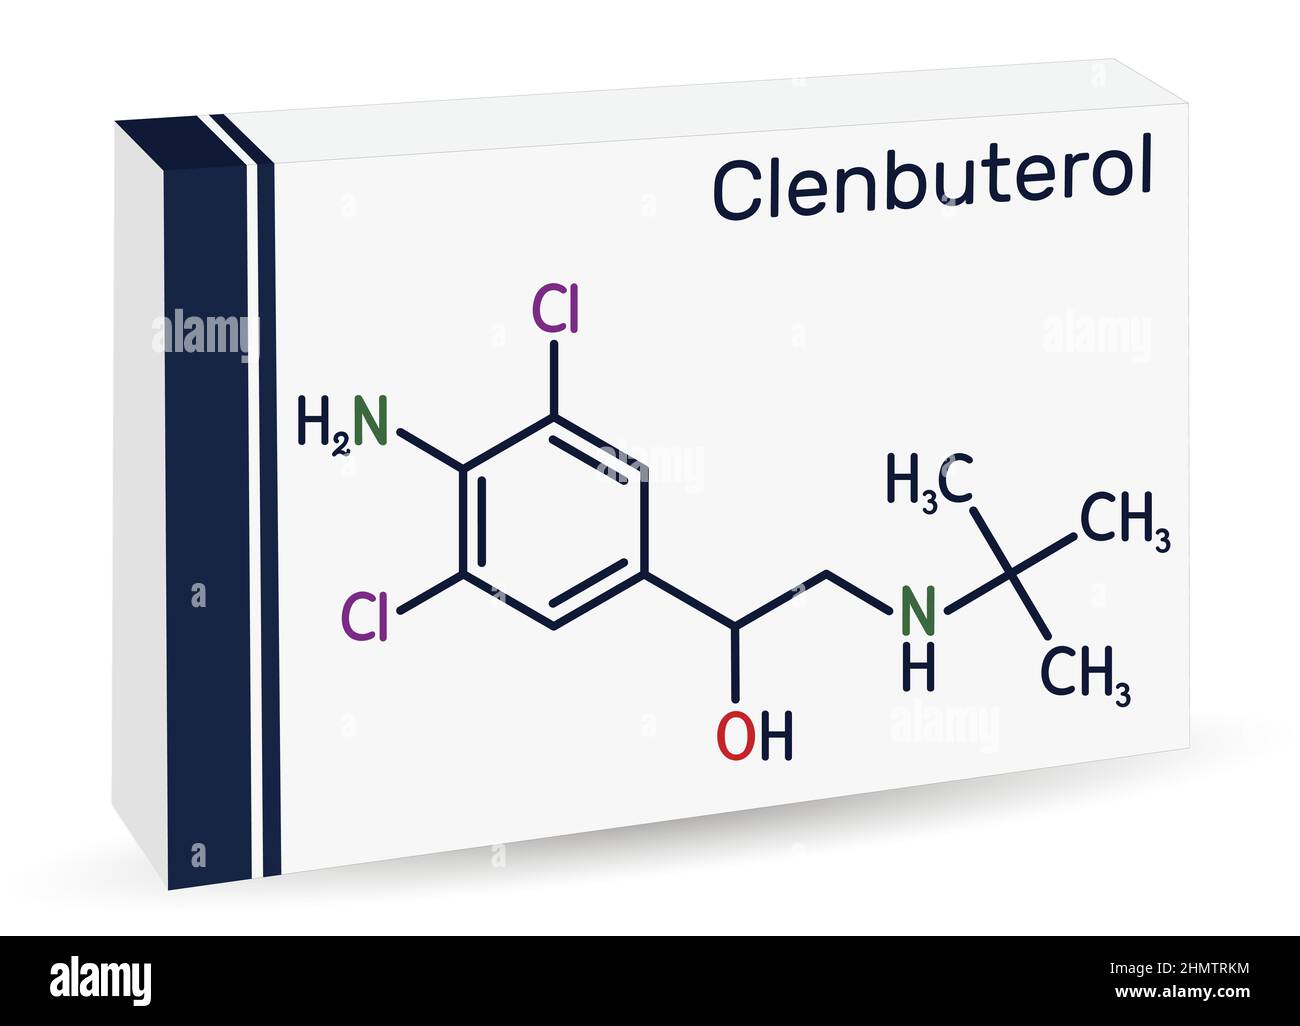 Clenbuterol molecule. It is sympathomimetic amine, decongestant and bronchodilator, used in respiratory conditions, in asthma. Skeletal chemical formu Stock Vector